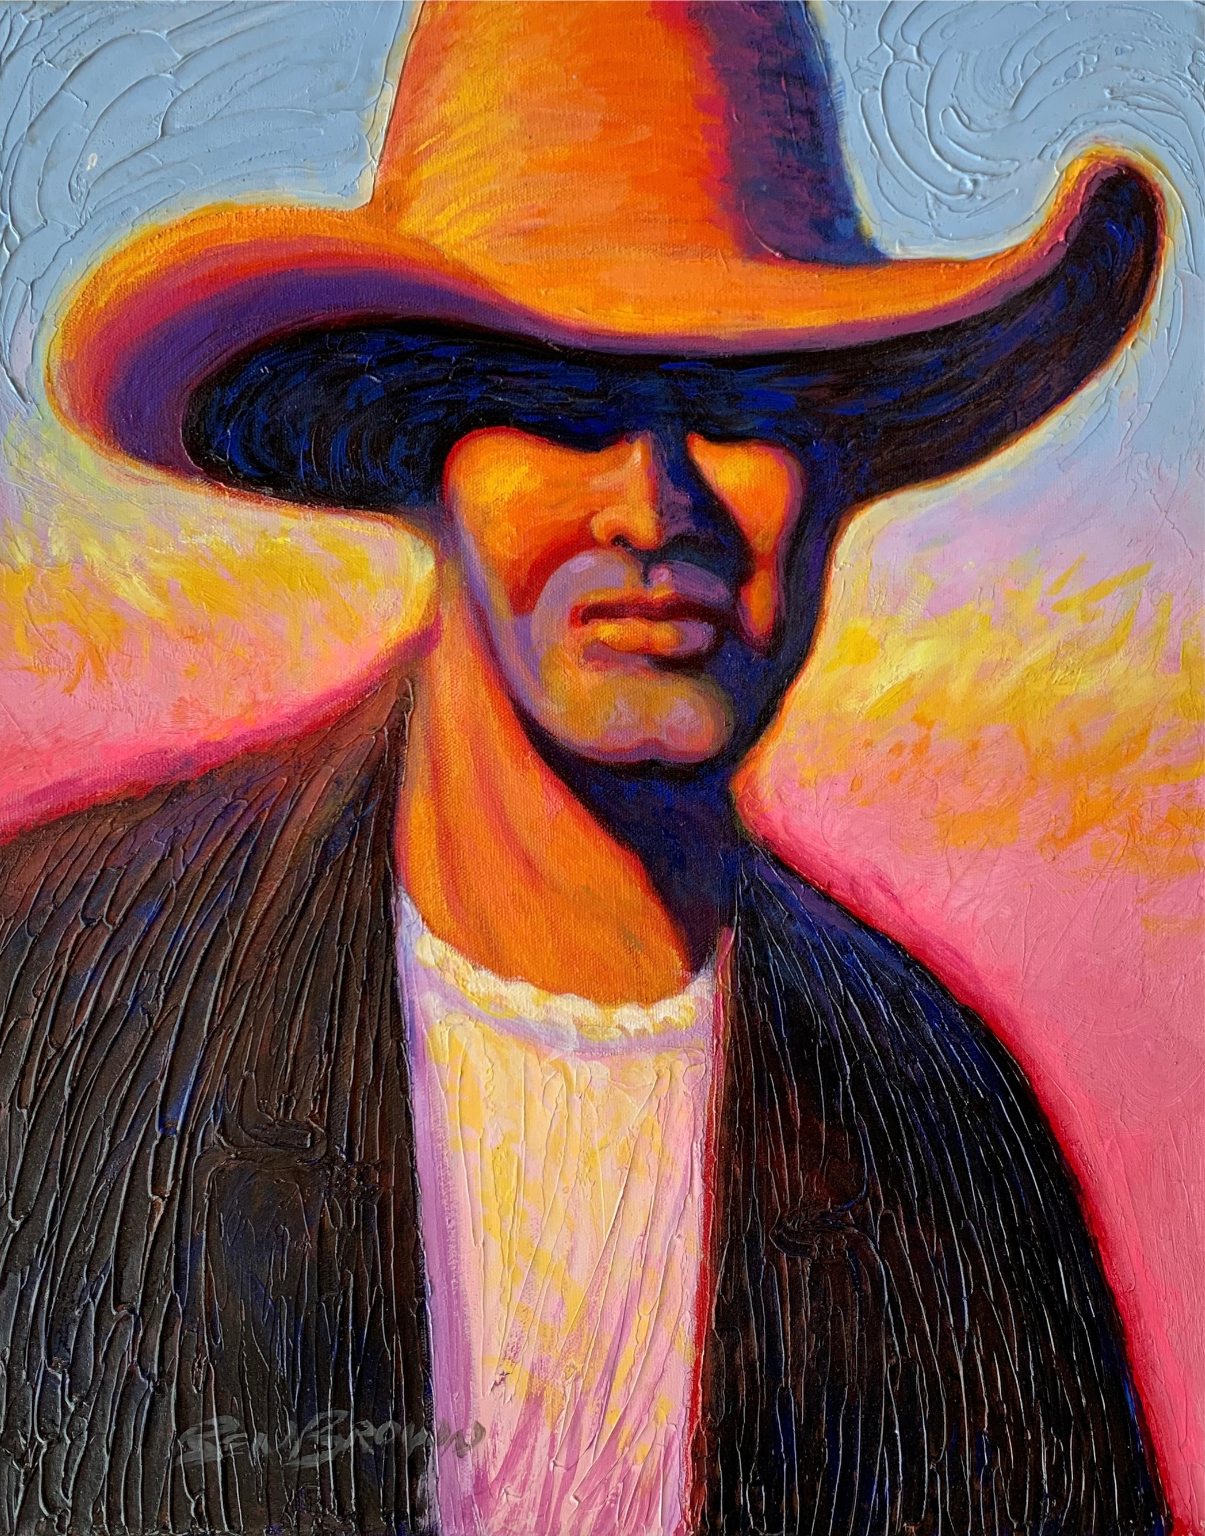 A colorful painting of a man wearing a cowboy hat.